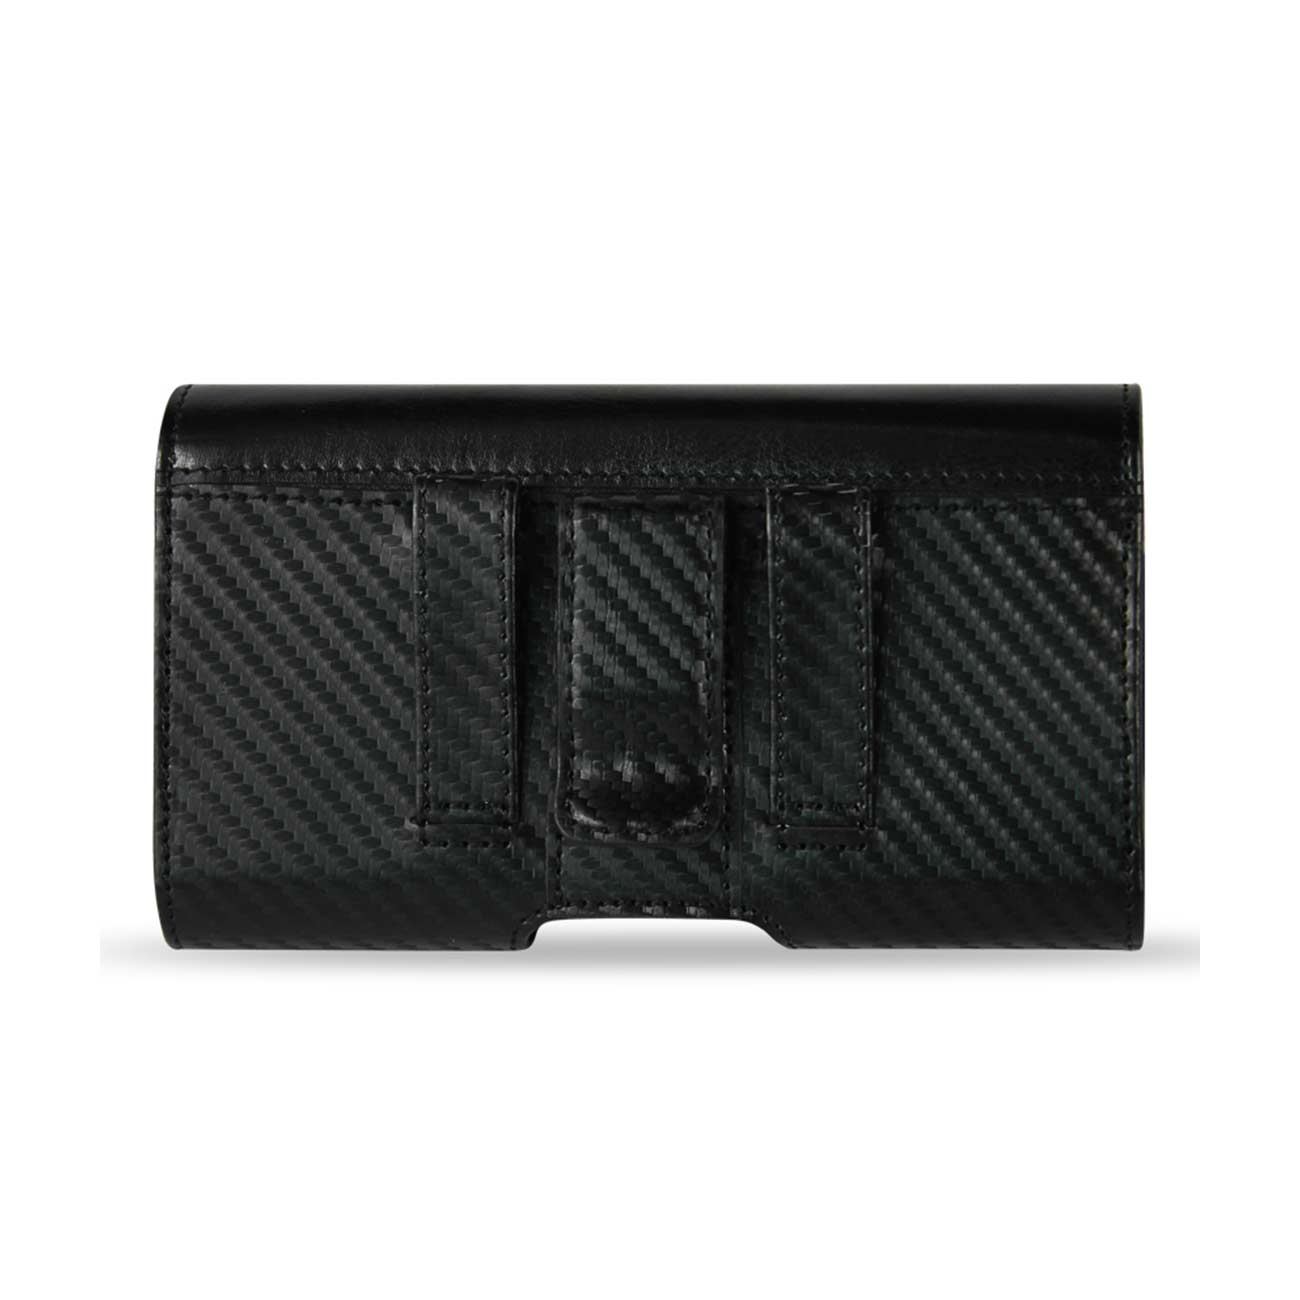 Pouch/ Phone Holster Leather Horizontal Z Lid Braided Pattern Black Color In Poly Bag Packaging